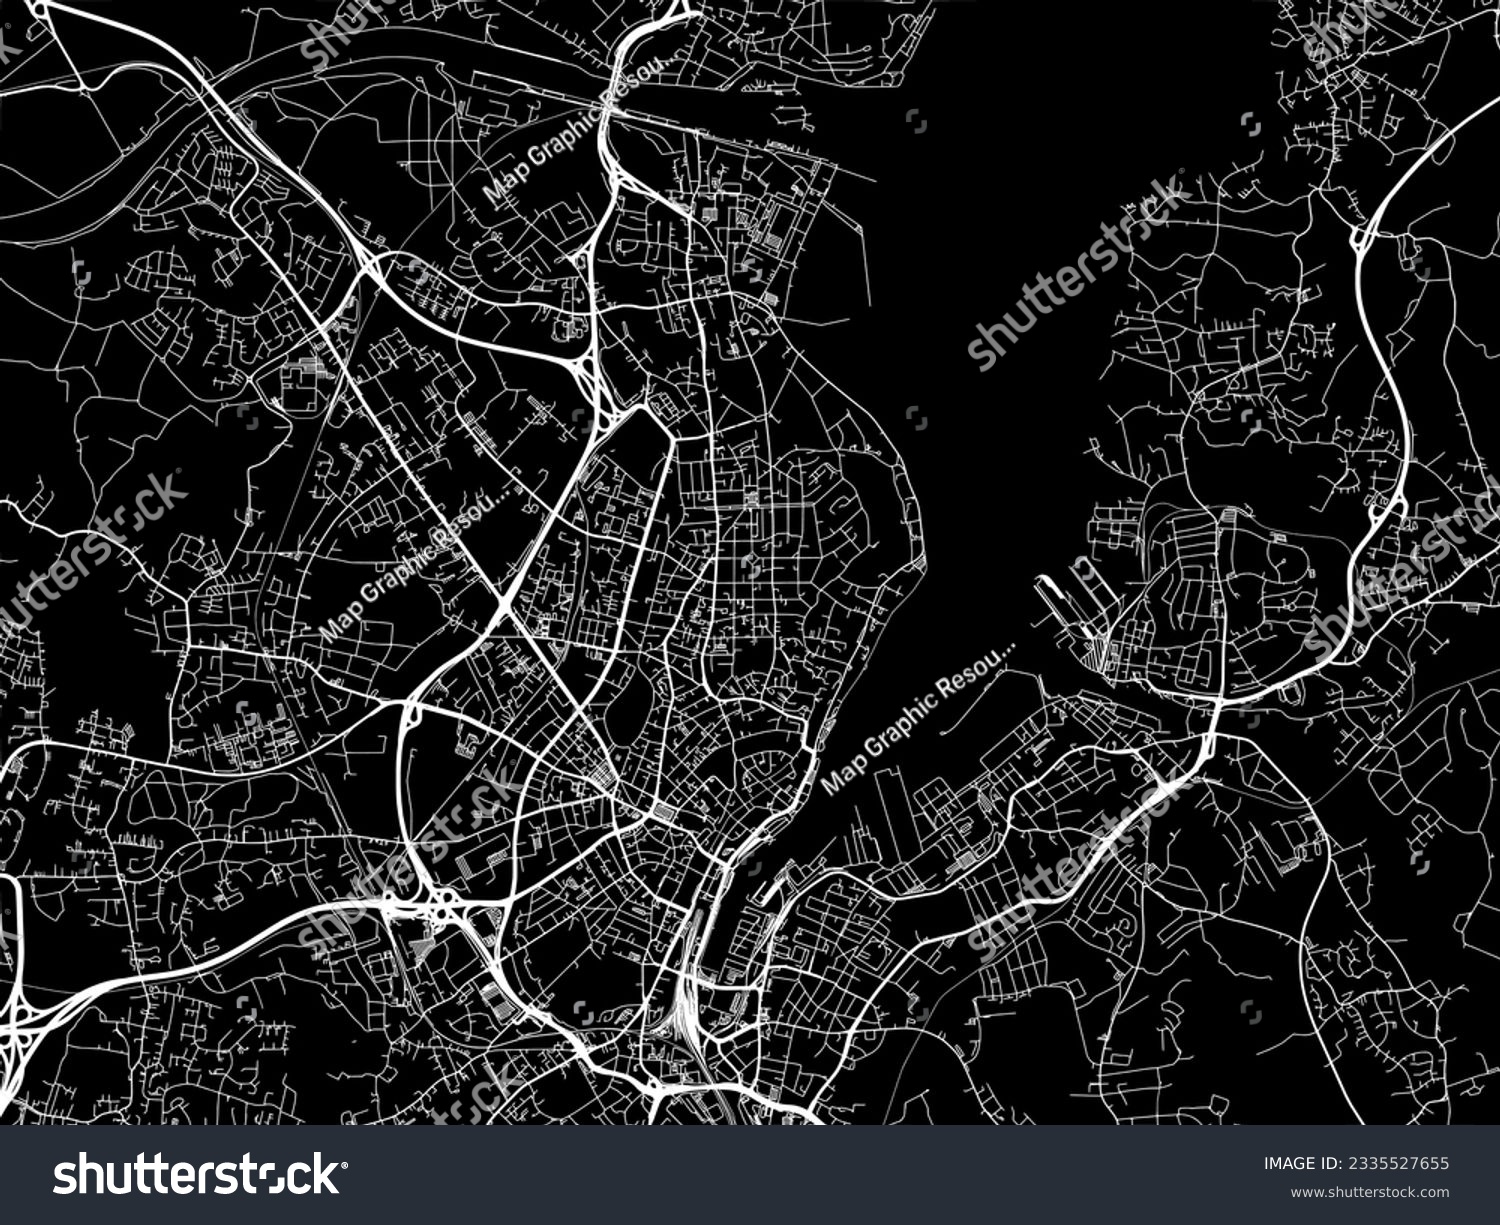 SVG of Vector city map of Kiel in Germany with white roads isolated on a black background. svg